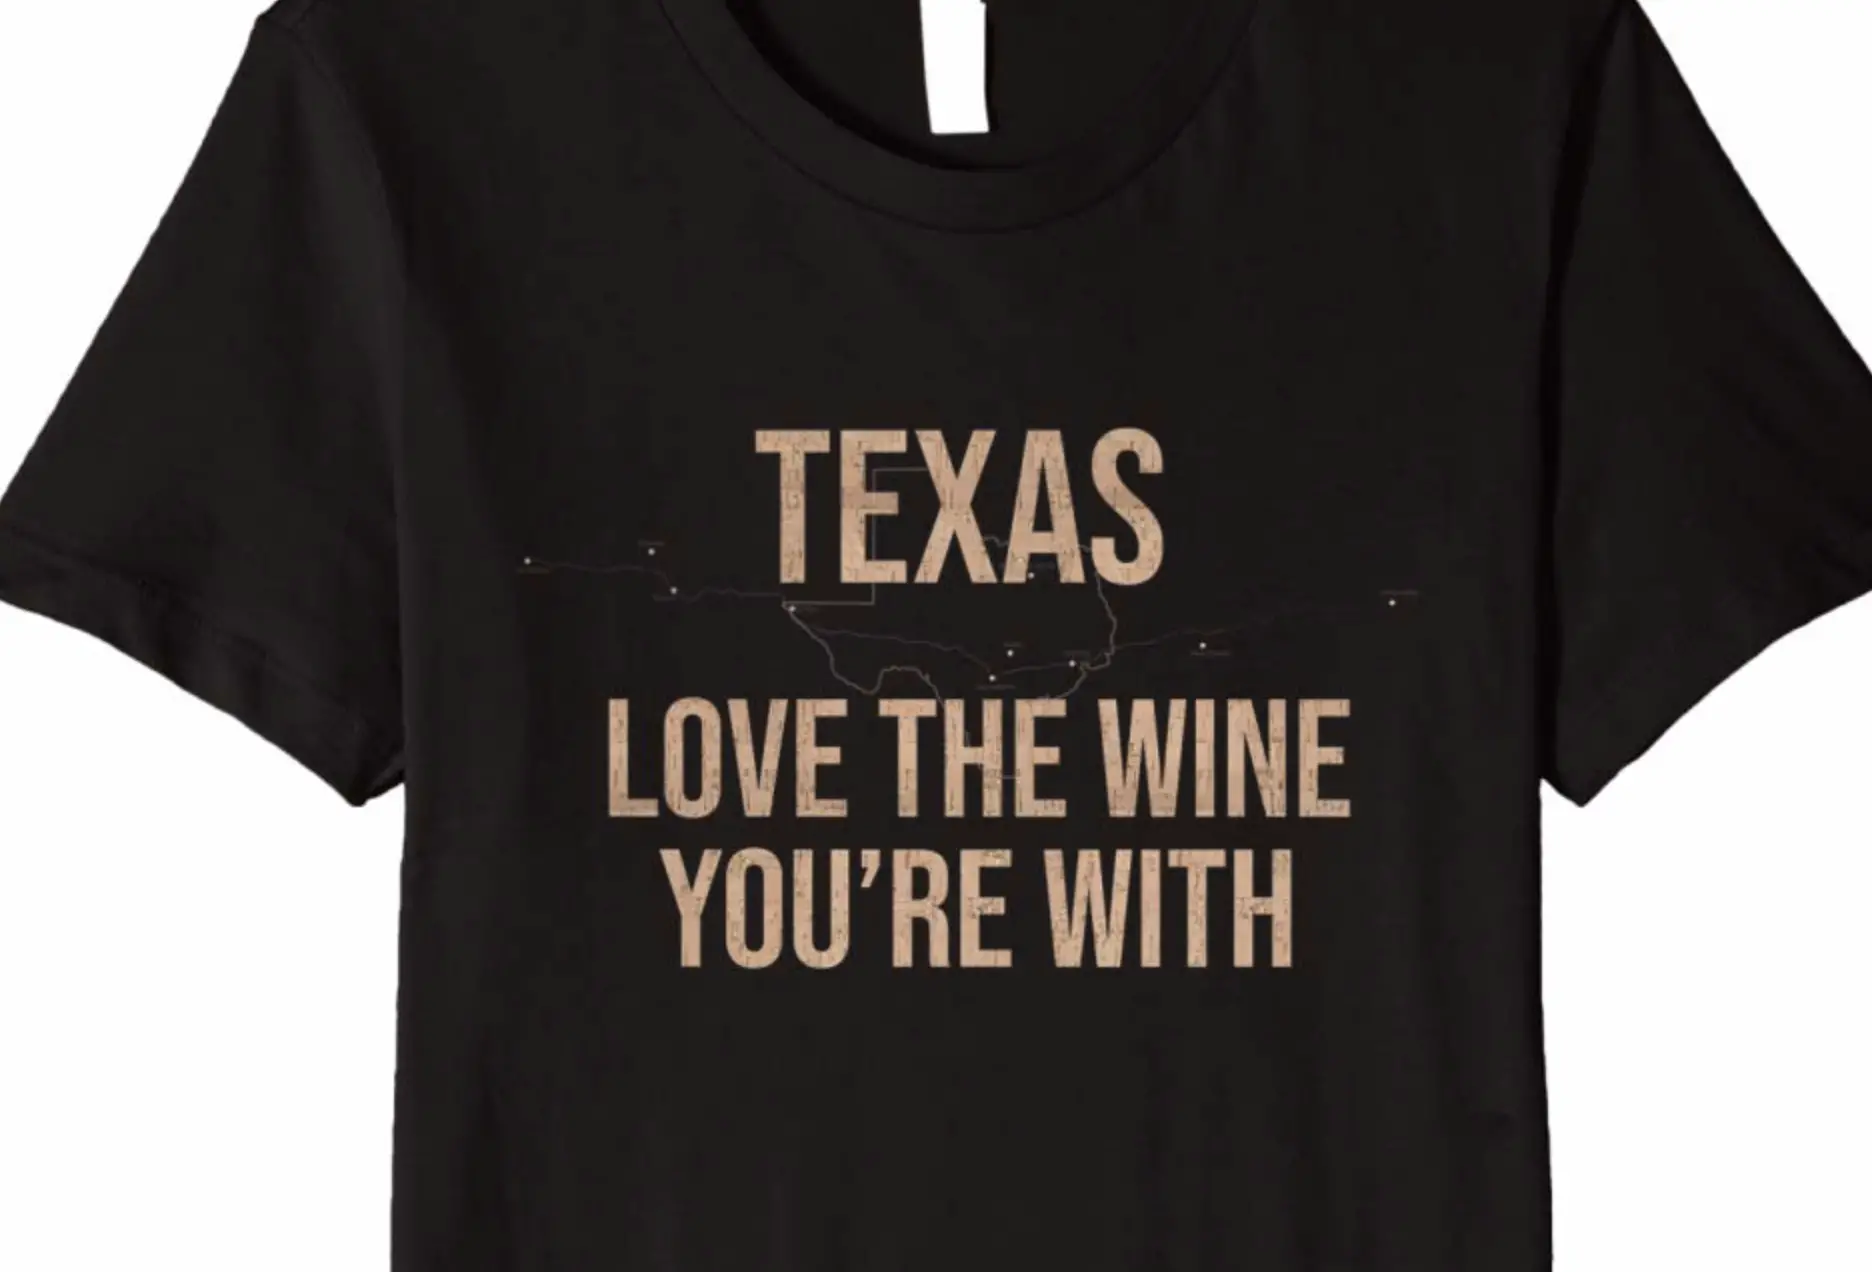 Texas, Love the Wine You're With T-shirt